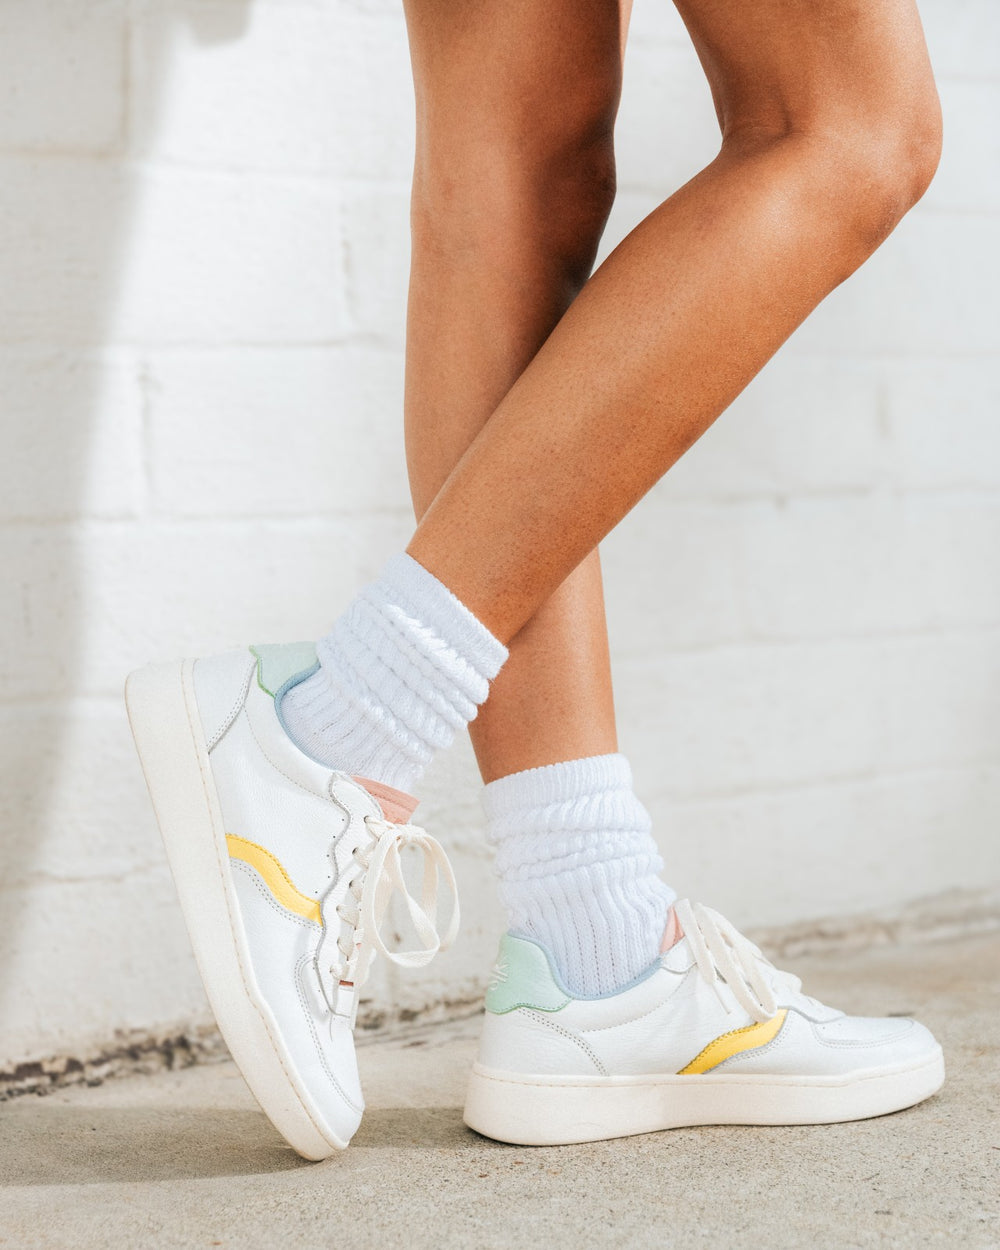 The Roma - Classic - White / Pastels - Women's - Women's Sneakers - White / Pastels - Soludos -